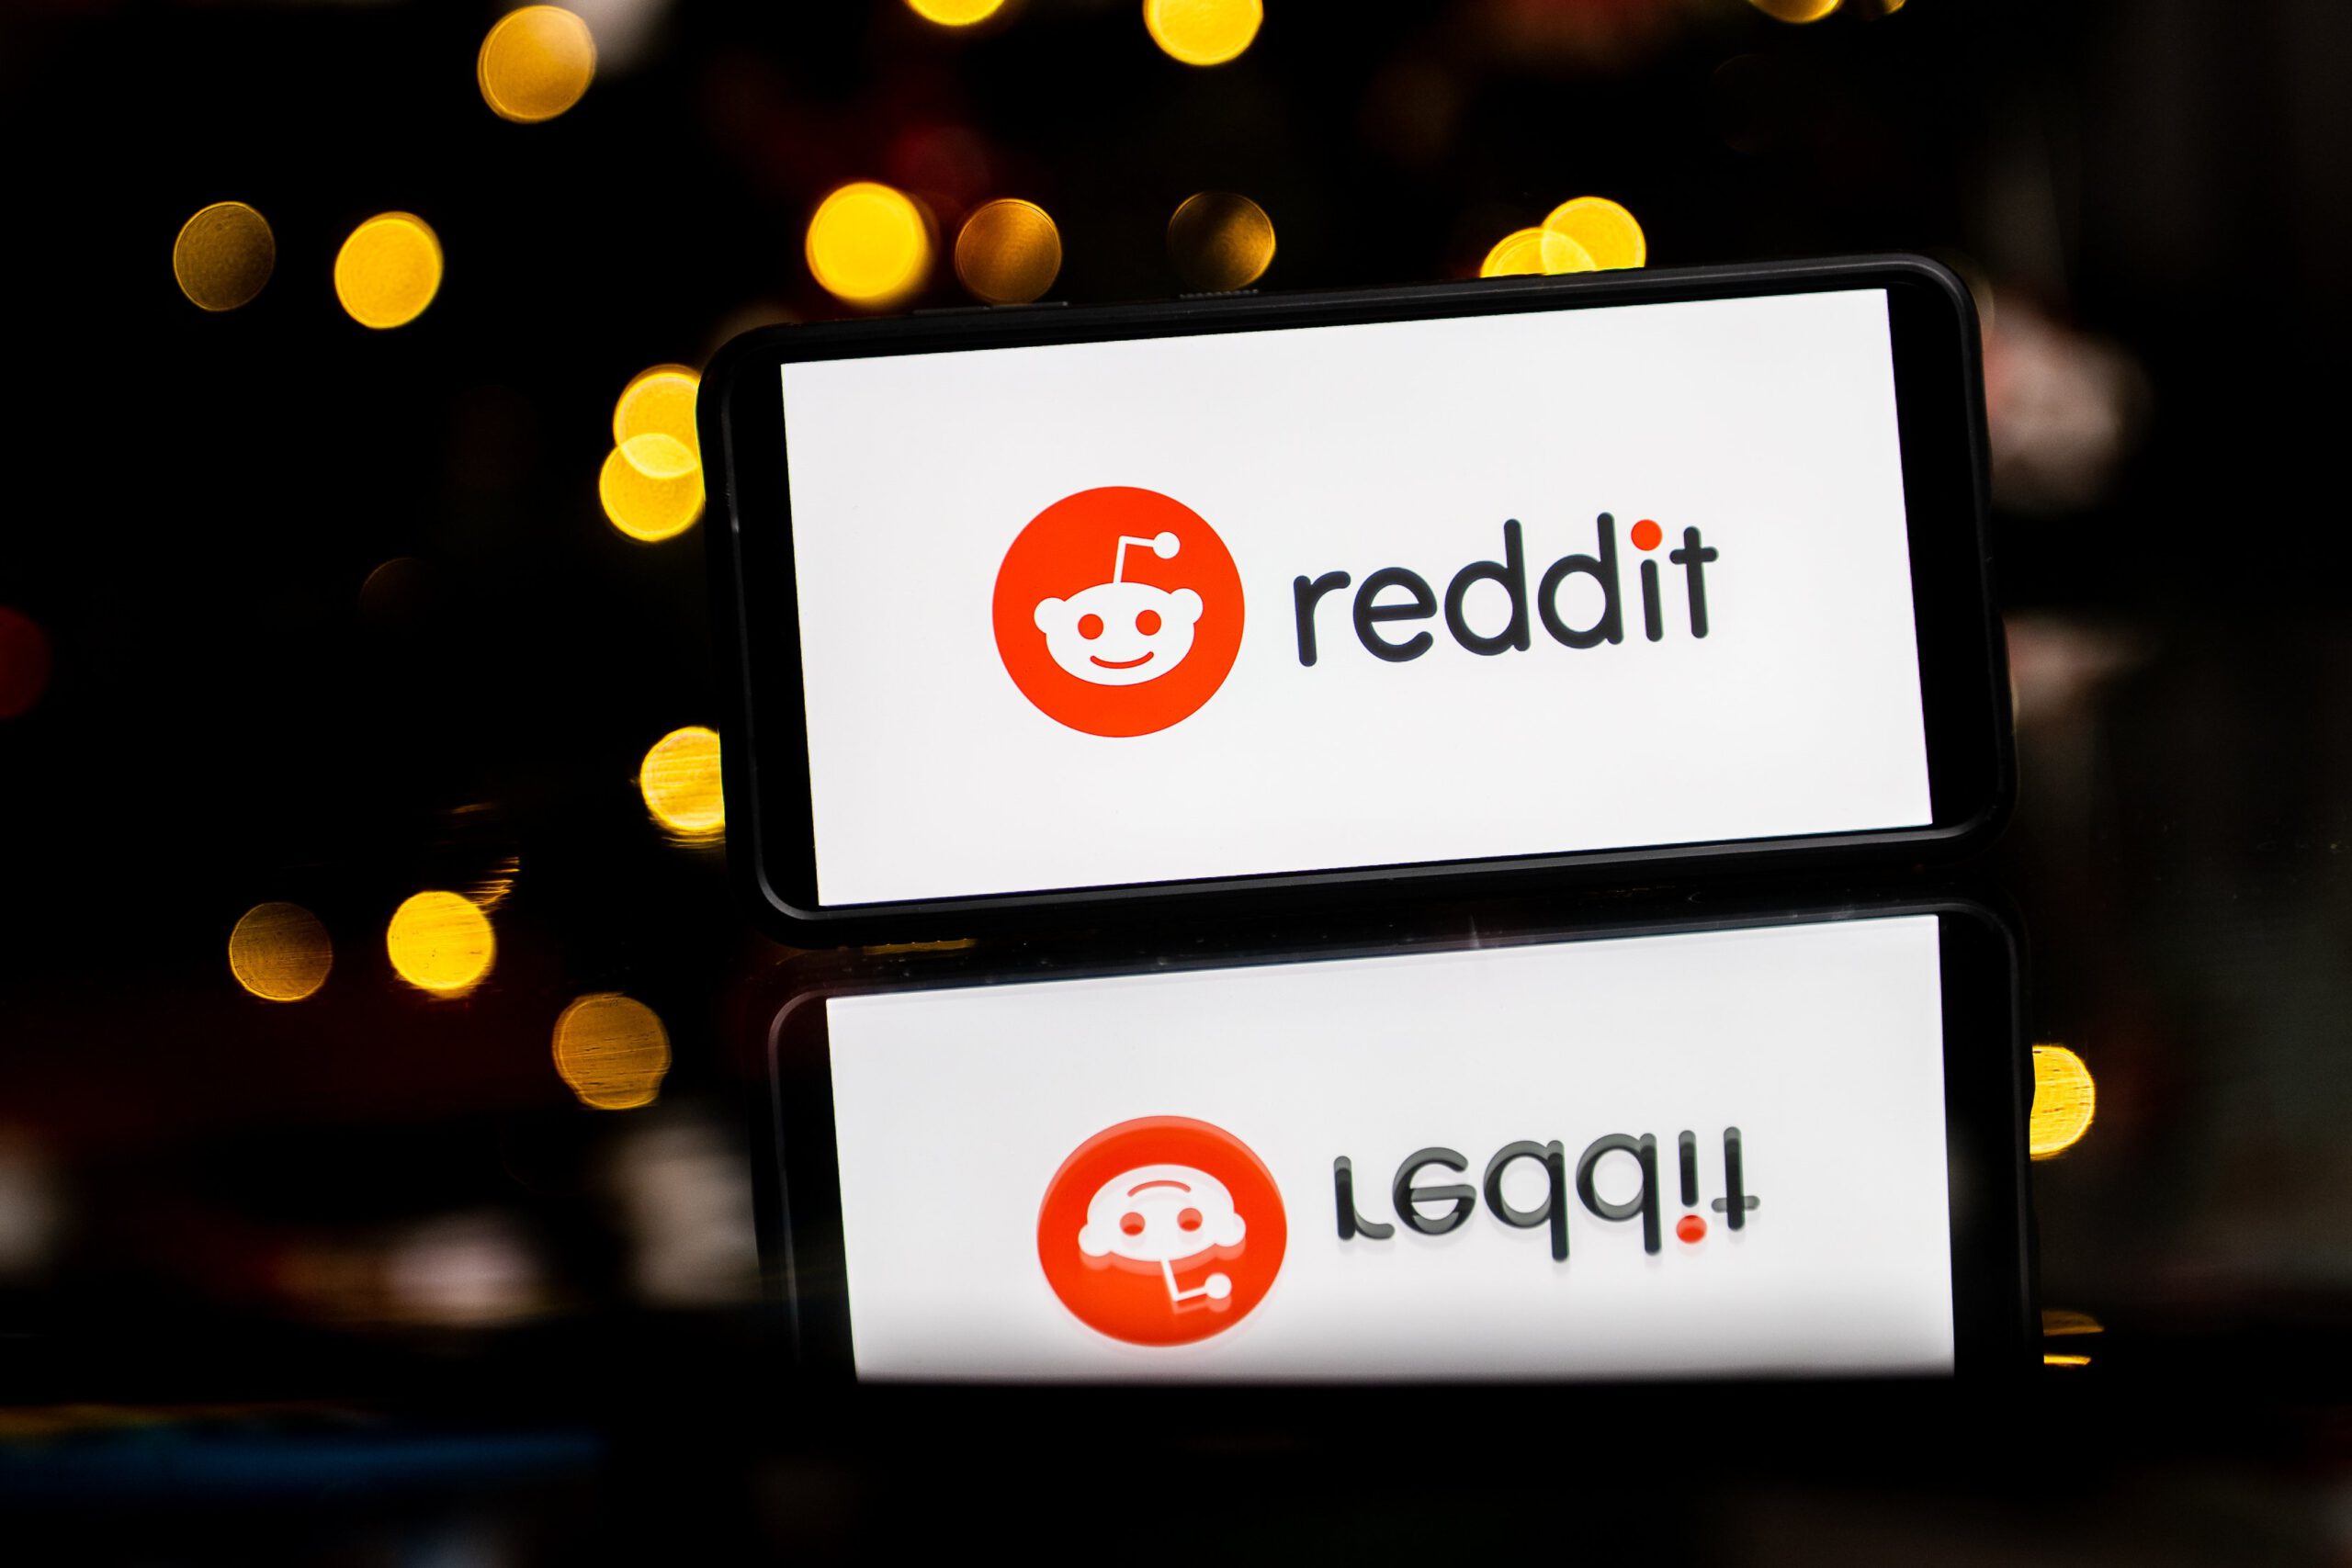 The reddit logo displayed on a smartphone screen.